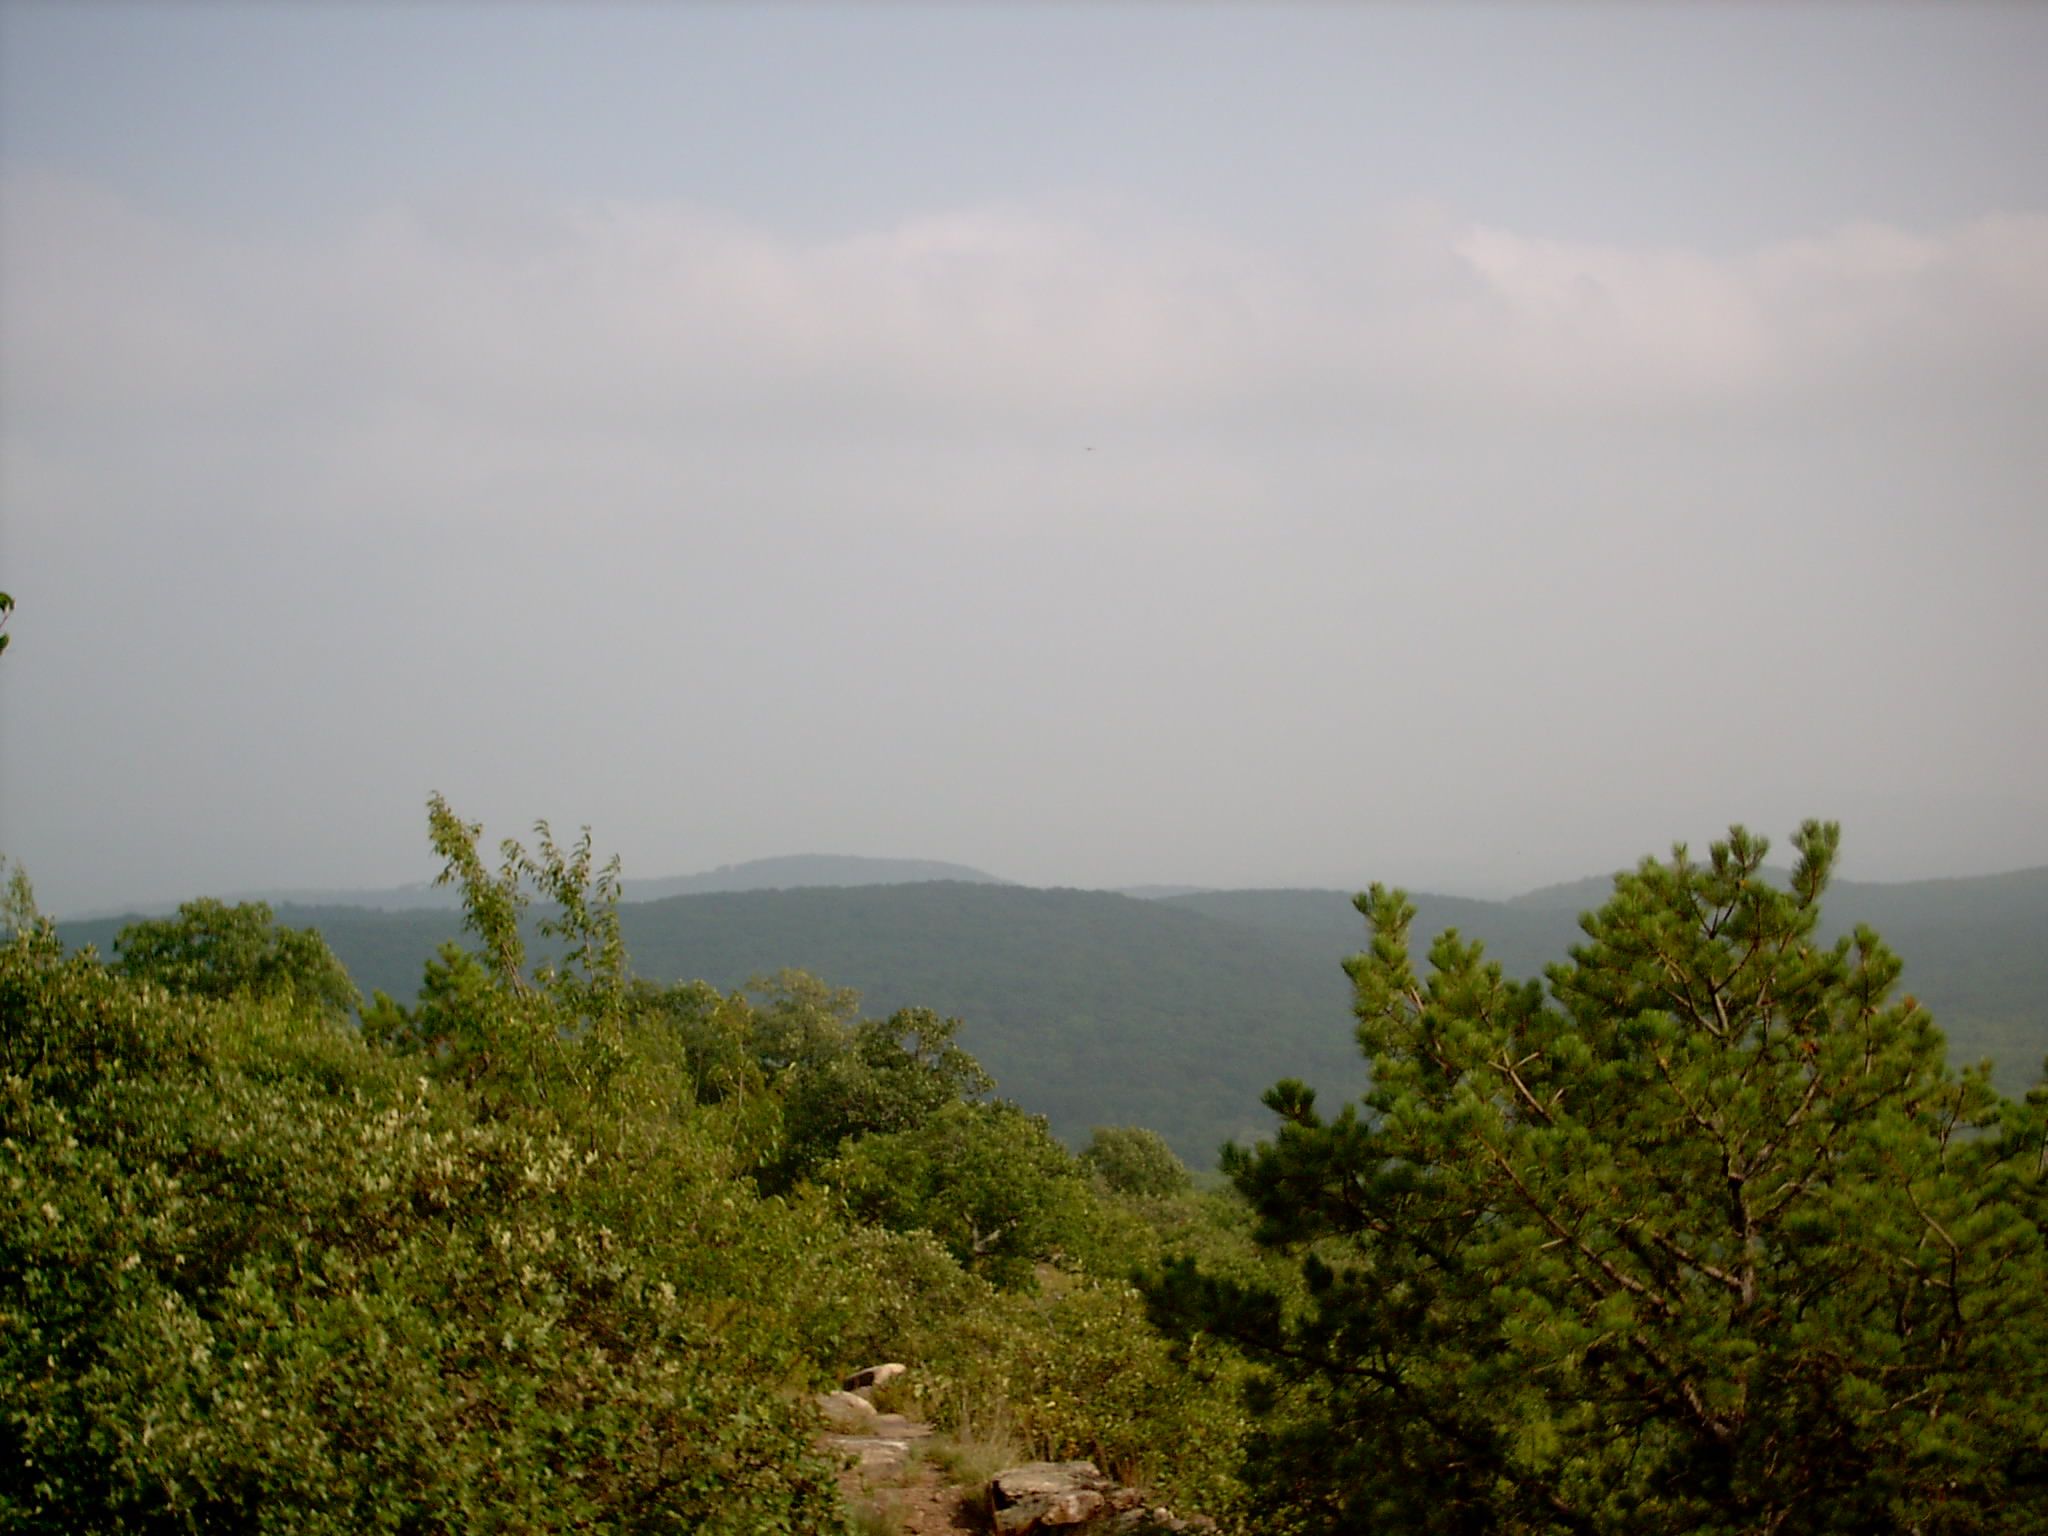 mm 8.5 - The view from the campsite/viewpoint at the north end of Black Mt. It is a great sweeping eastern view toward the Hudson valley.  Courtesy stewartriley@earthlink.net